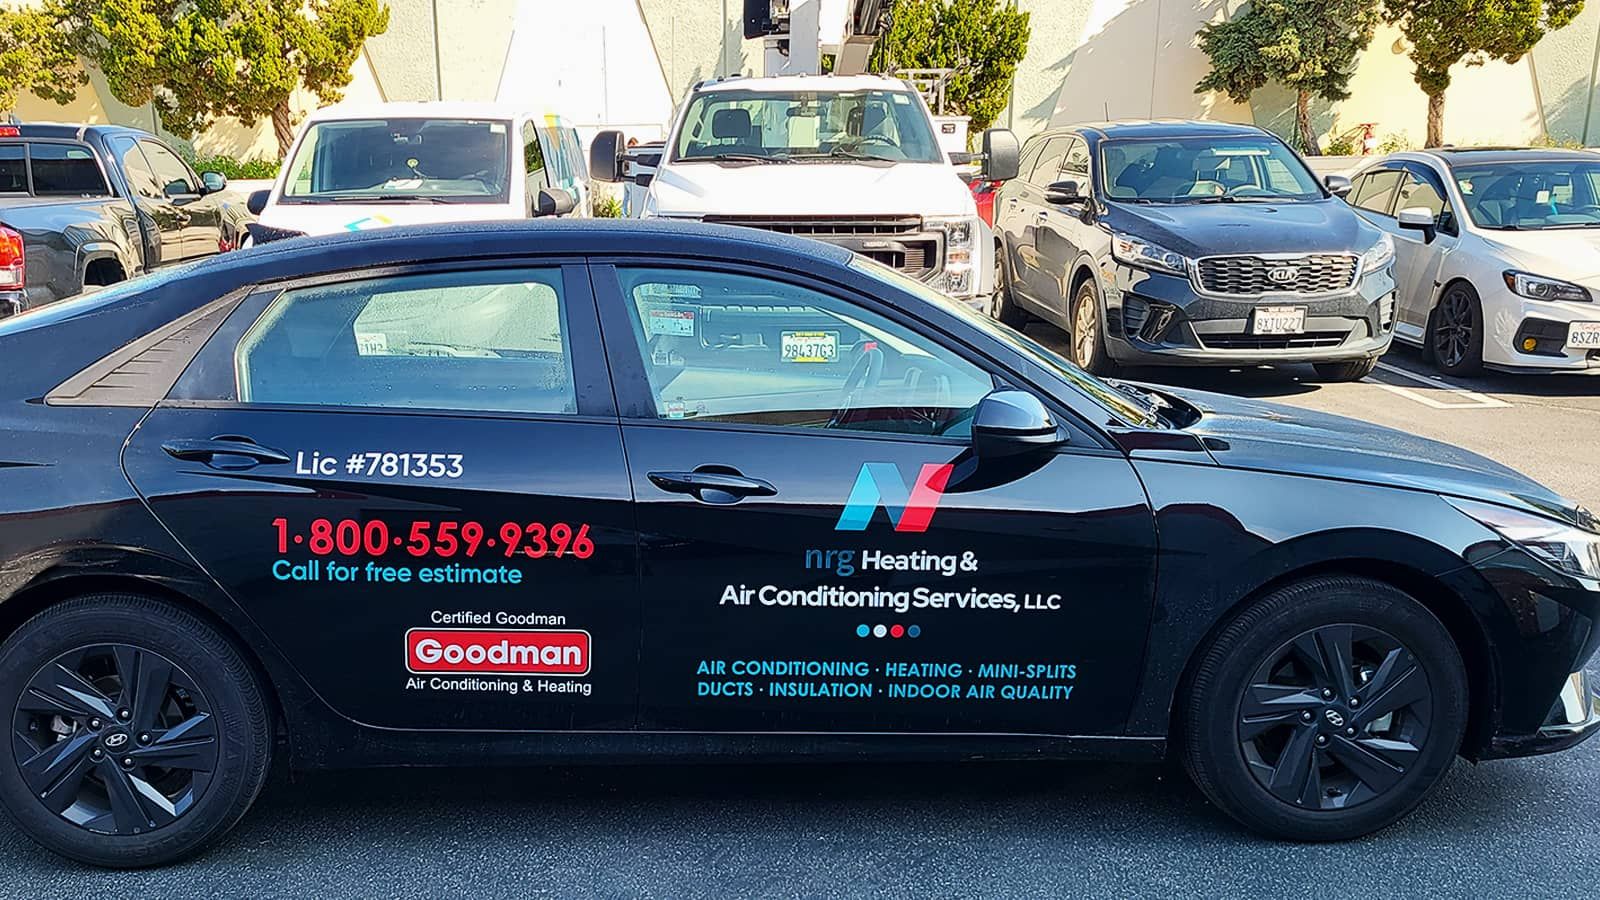 NRG Heating & Air Conditioning car wrap applied to the door